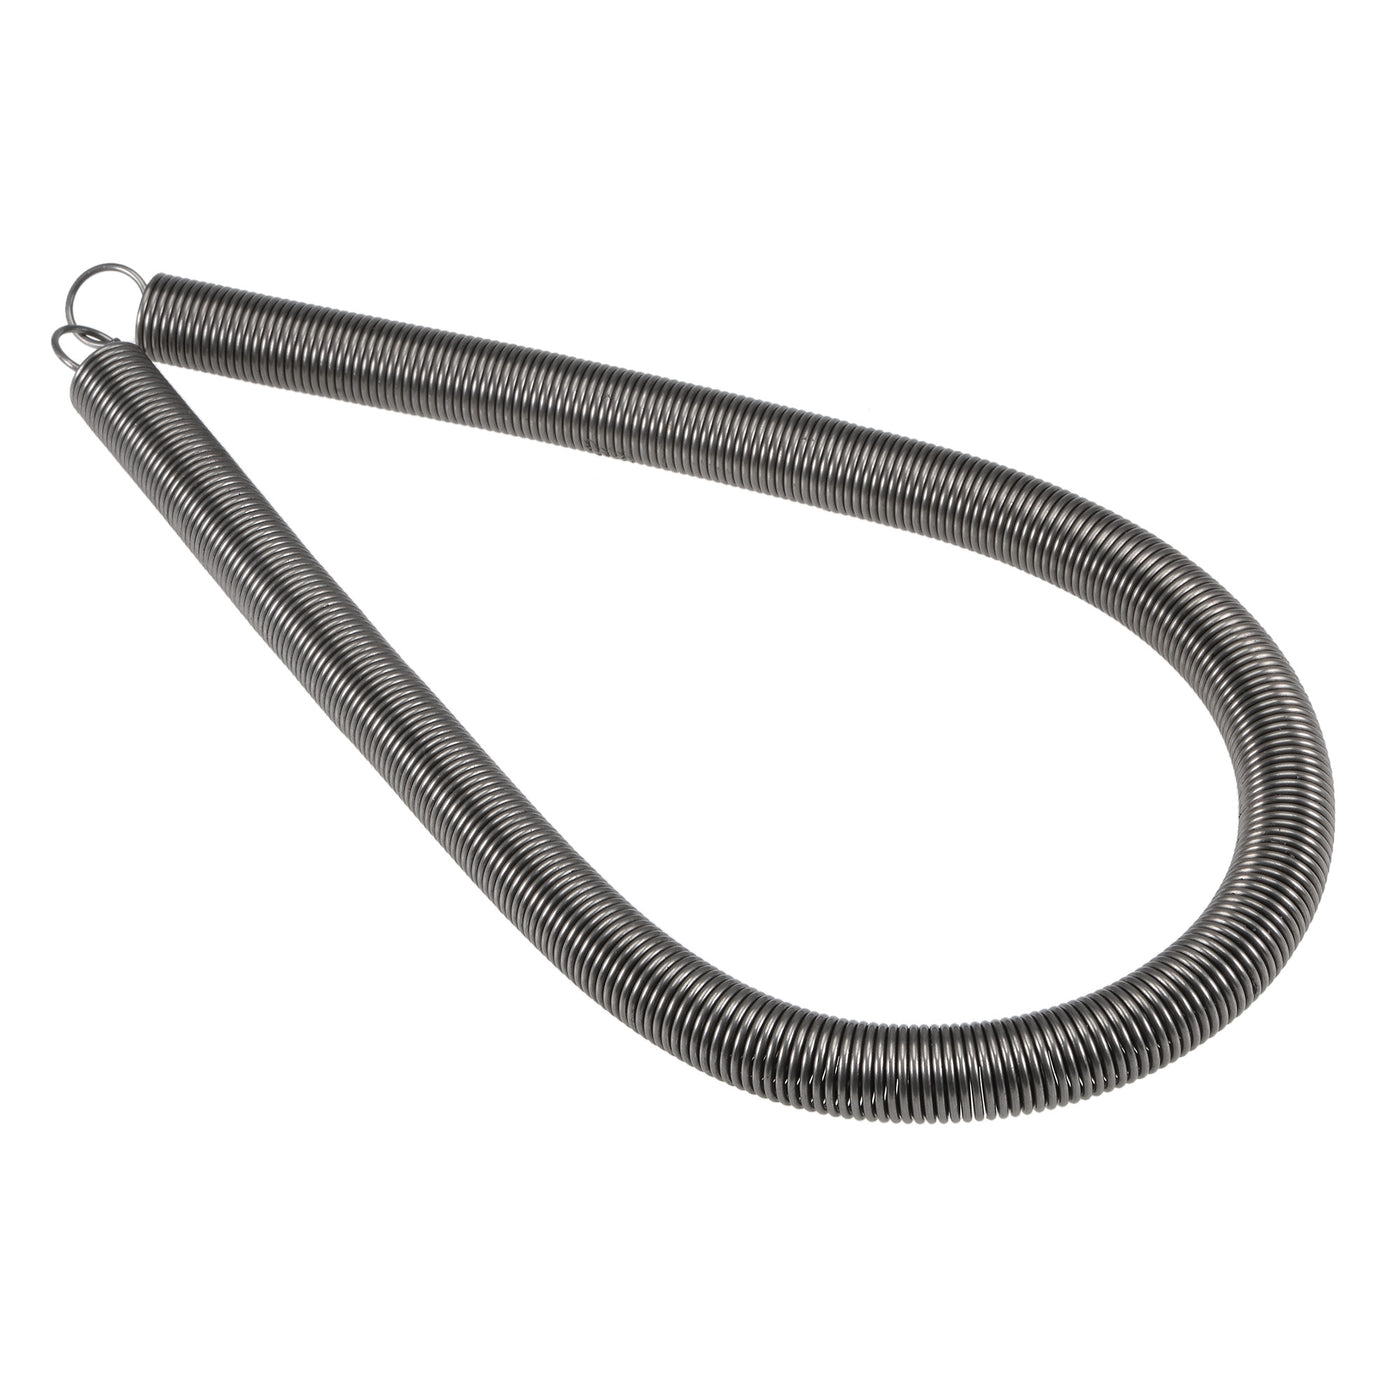 Uxcell Uxcell 1.4mmx14mmx250mm Extended Compression Spring ,8.4Lbs Load Capacity,Grey